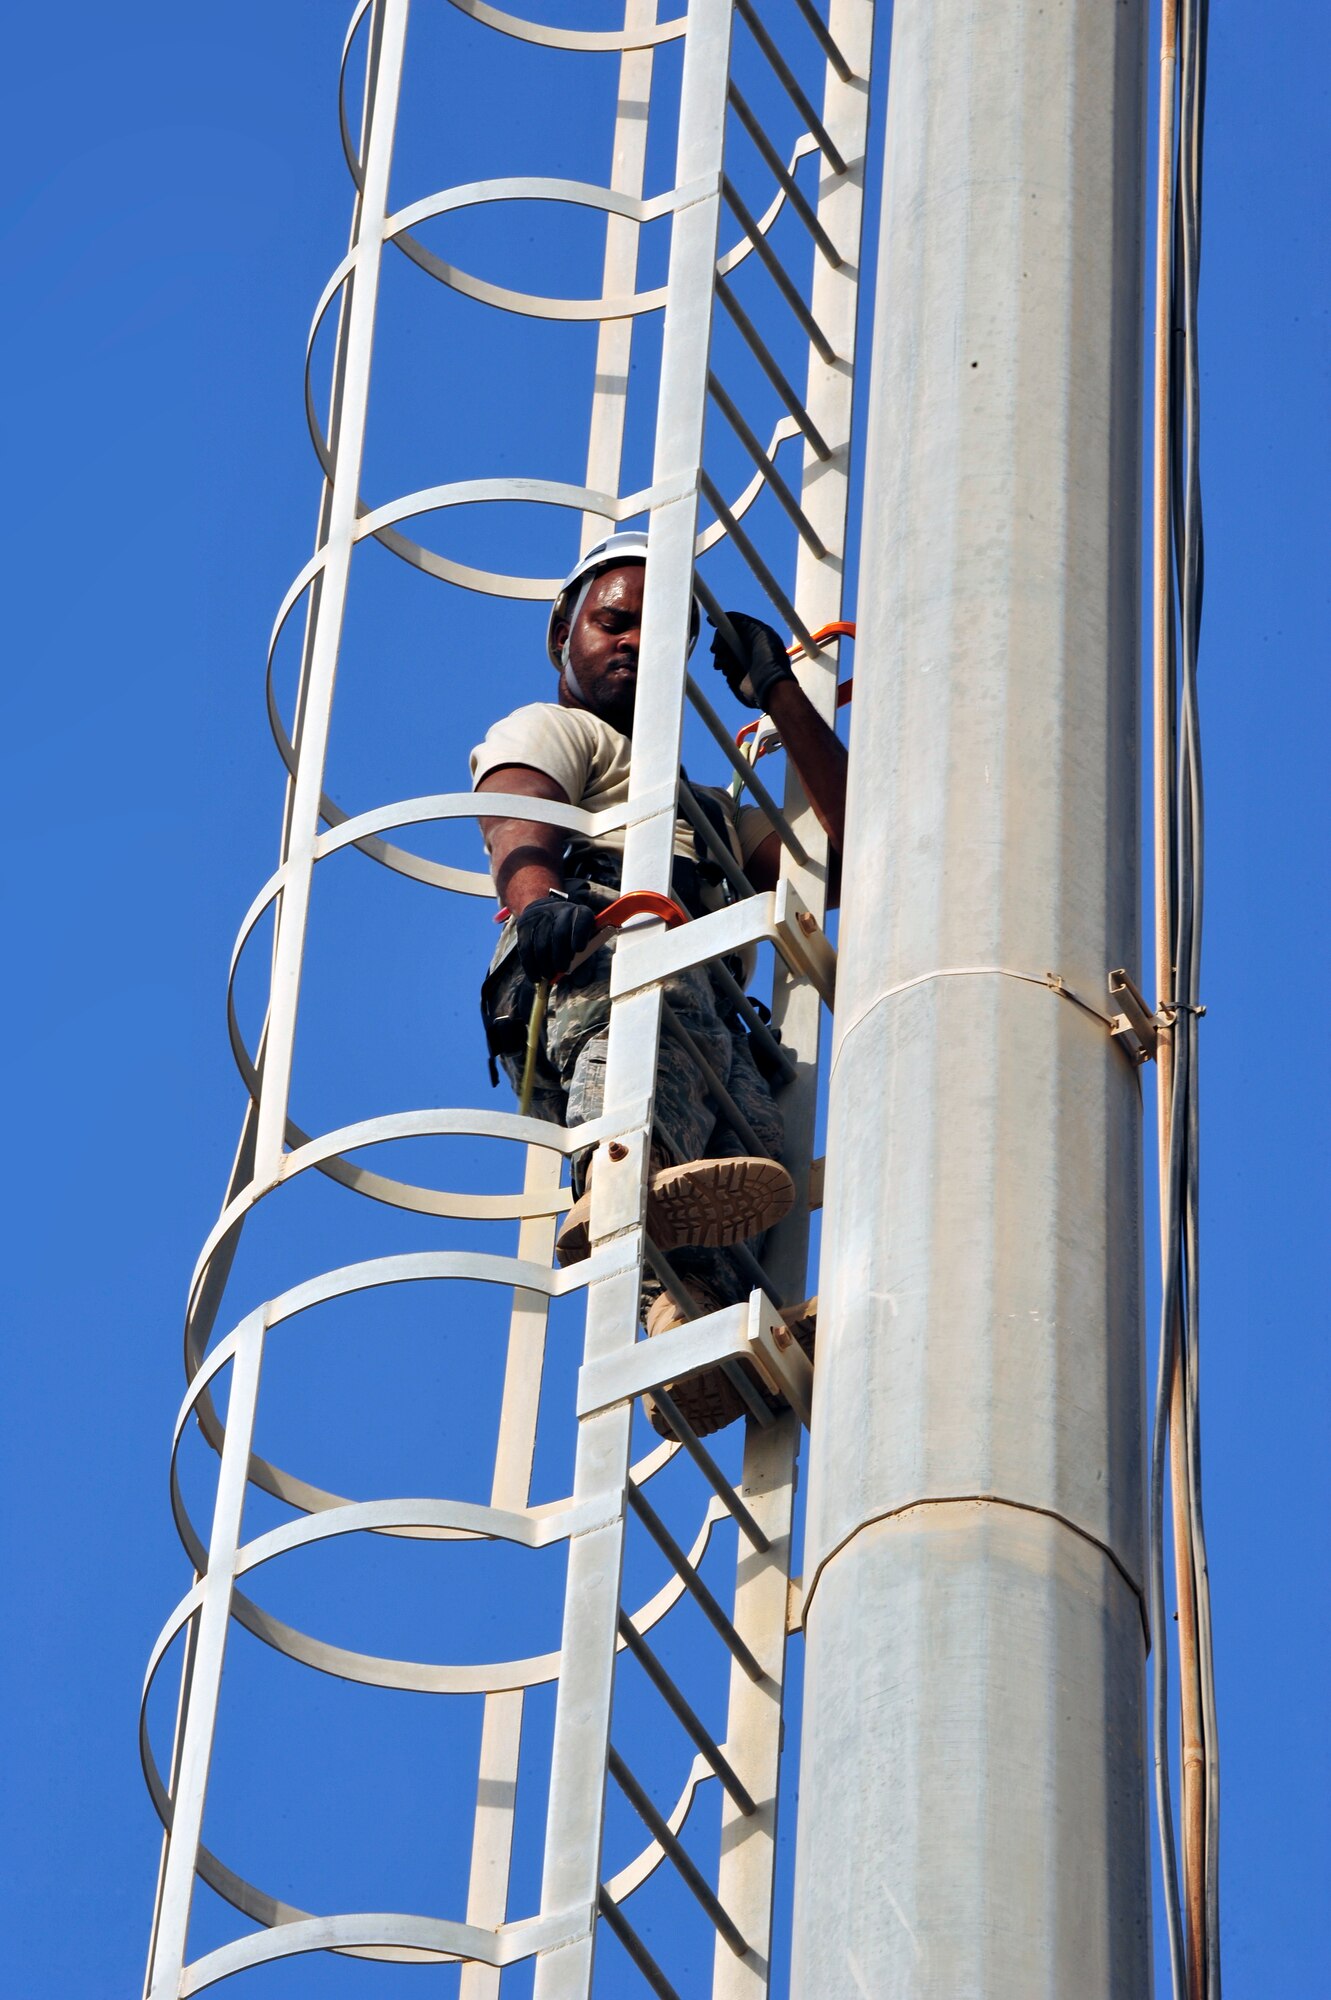 SOUTHWEST ASIA -Tech. Sgt. Antonio Turner, 380th Expeditionary Communication Squadron, climbs down from an equipment tower Aug. 26. Sergeant Turner is deployed from Lackland Air Force Base, Texas and hails from Richmond, Va. (U.S. Air Force photo/Tech. Sgt. Charles Larkin Sr)